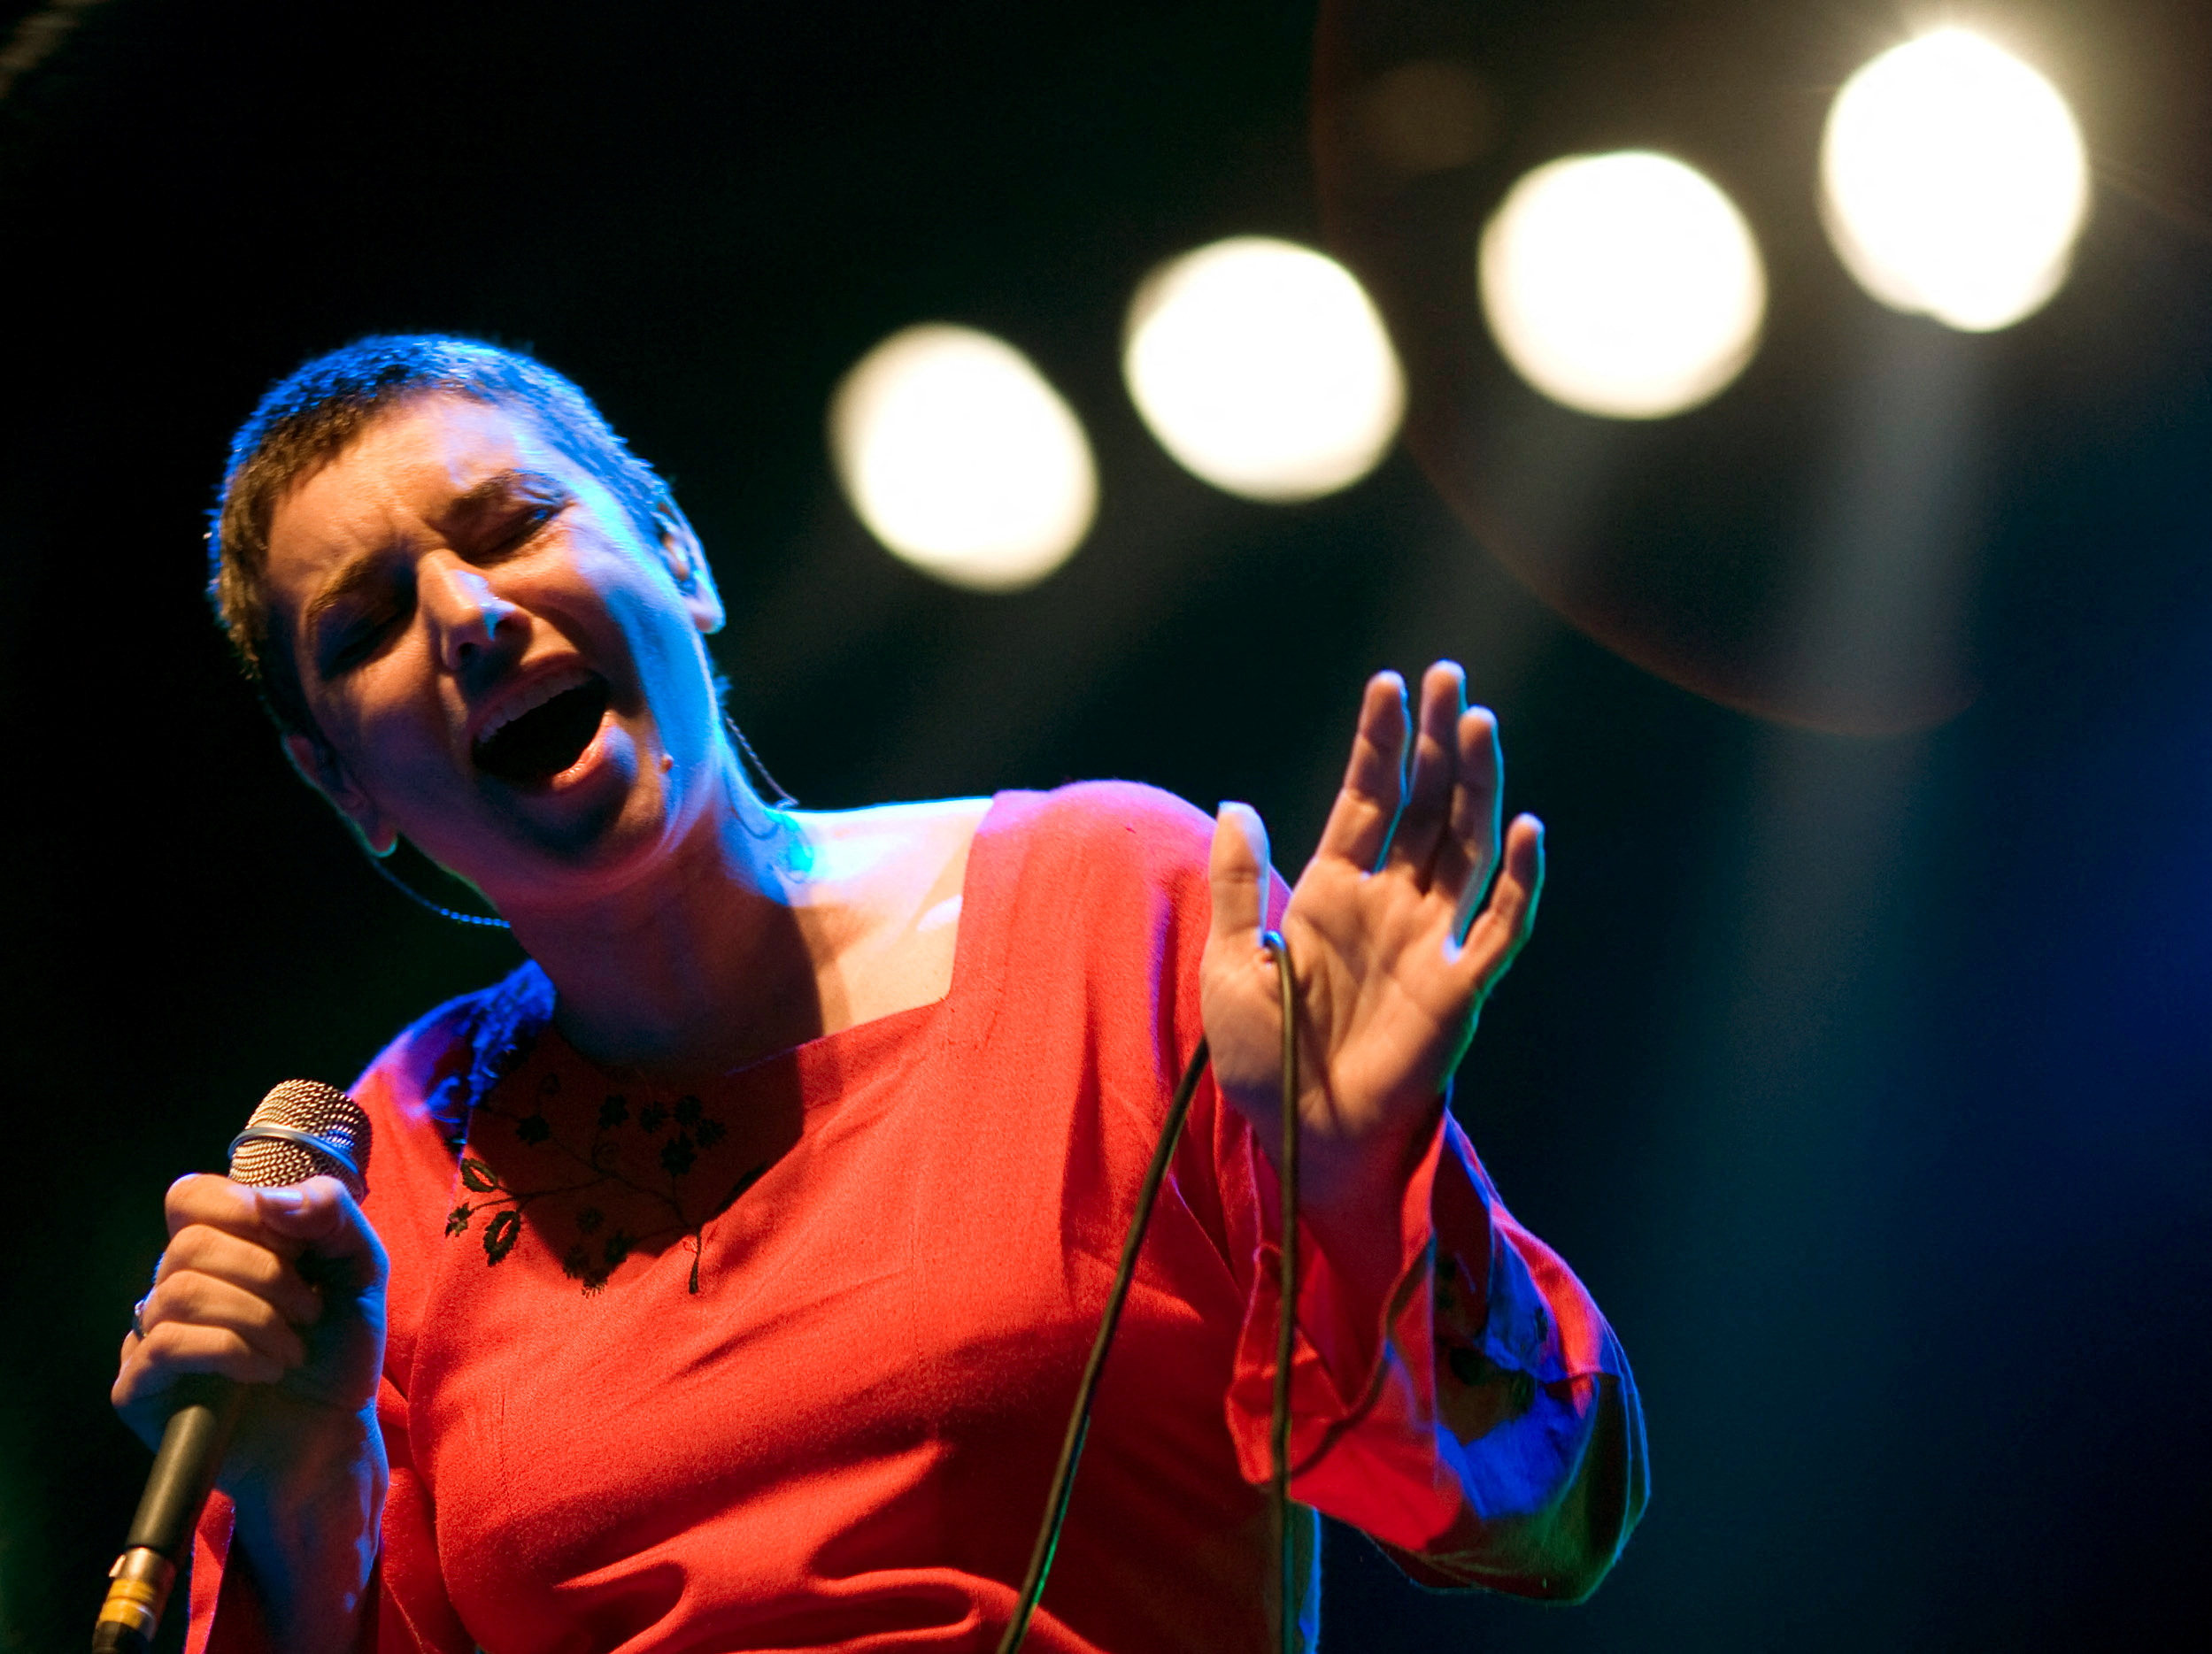 Irish singer Sinead O’Connor performing during the Masstival music festival in Istanbul in 2007. Photo: Reuters